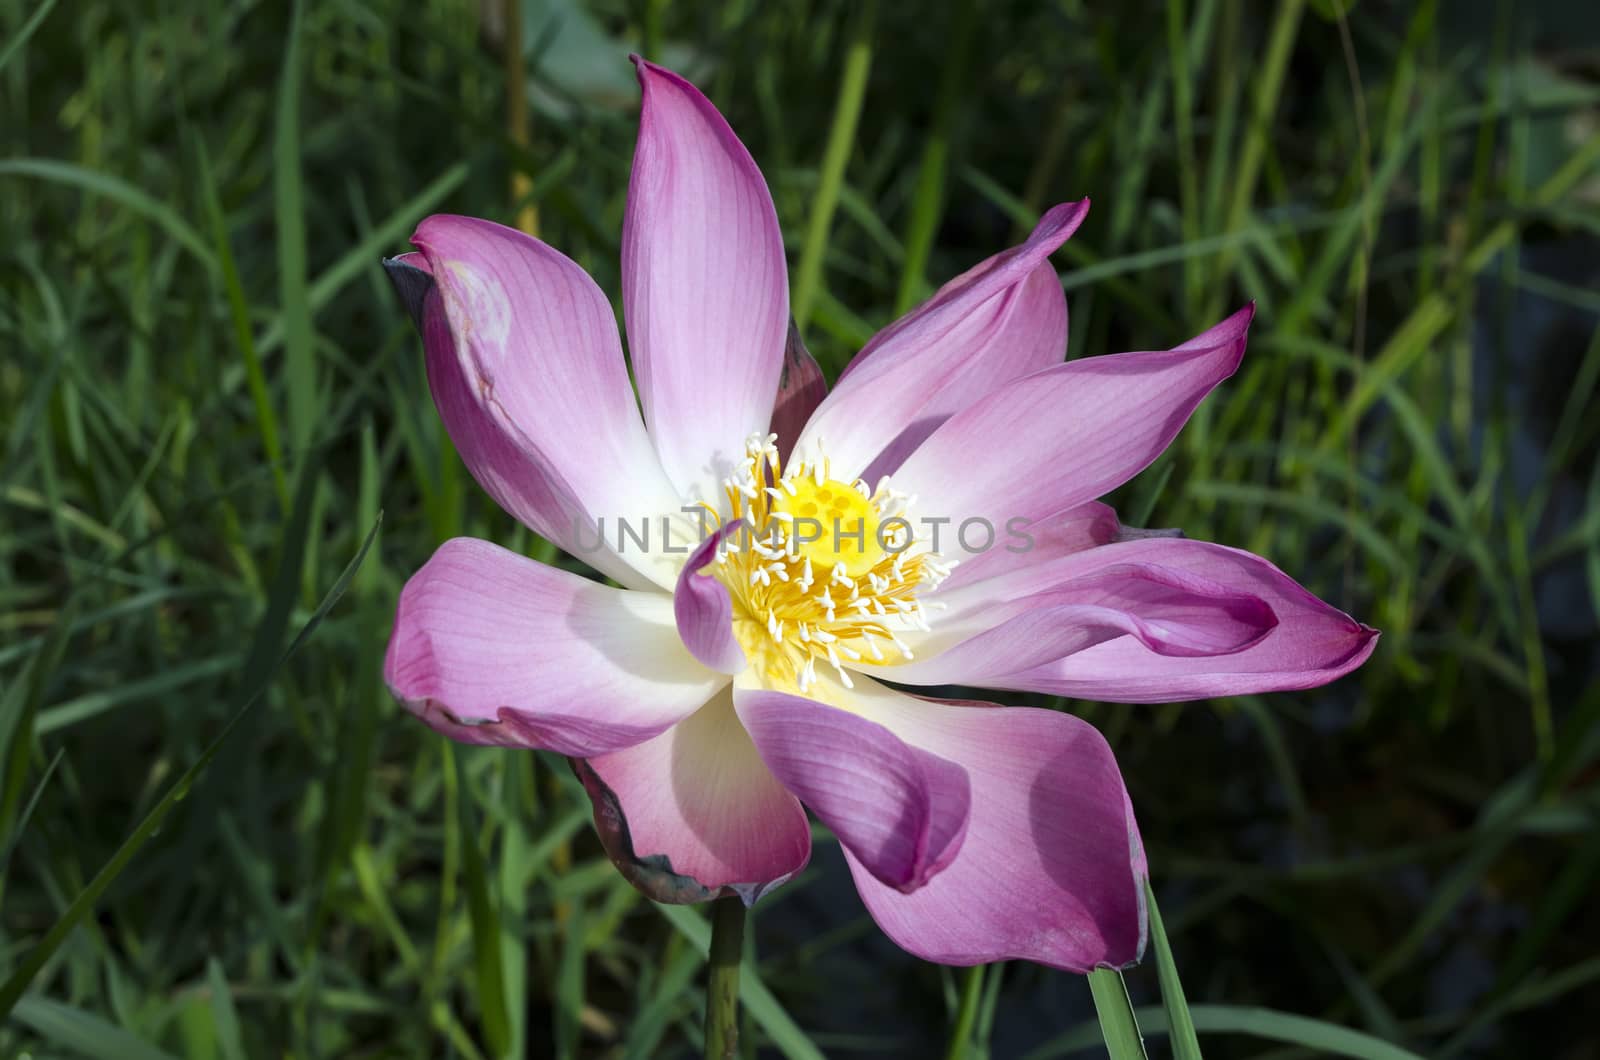 Old Lotus Flower. by GNNick